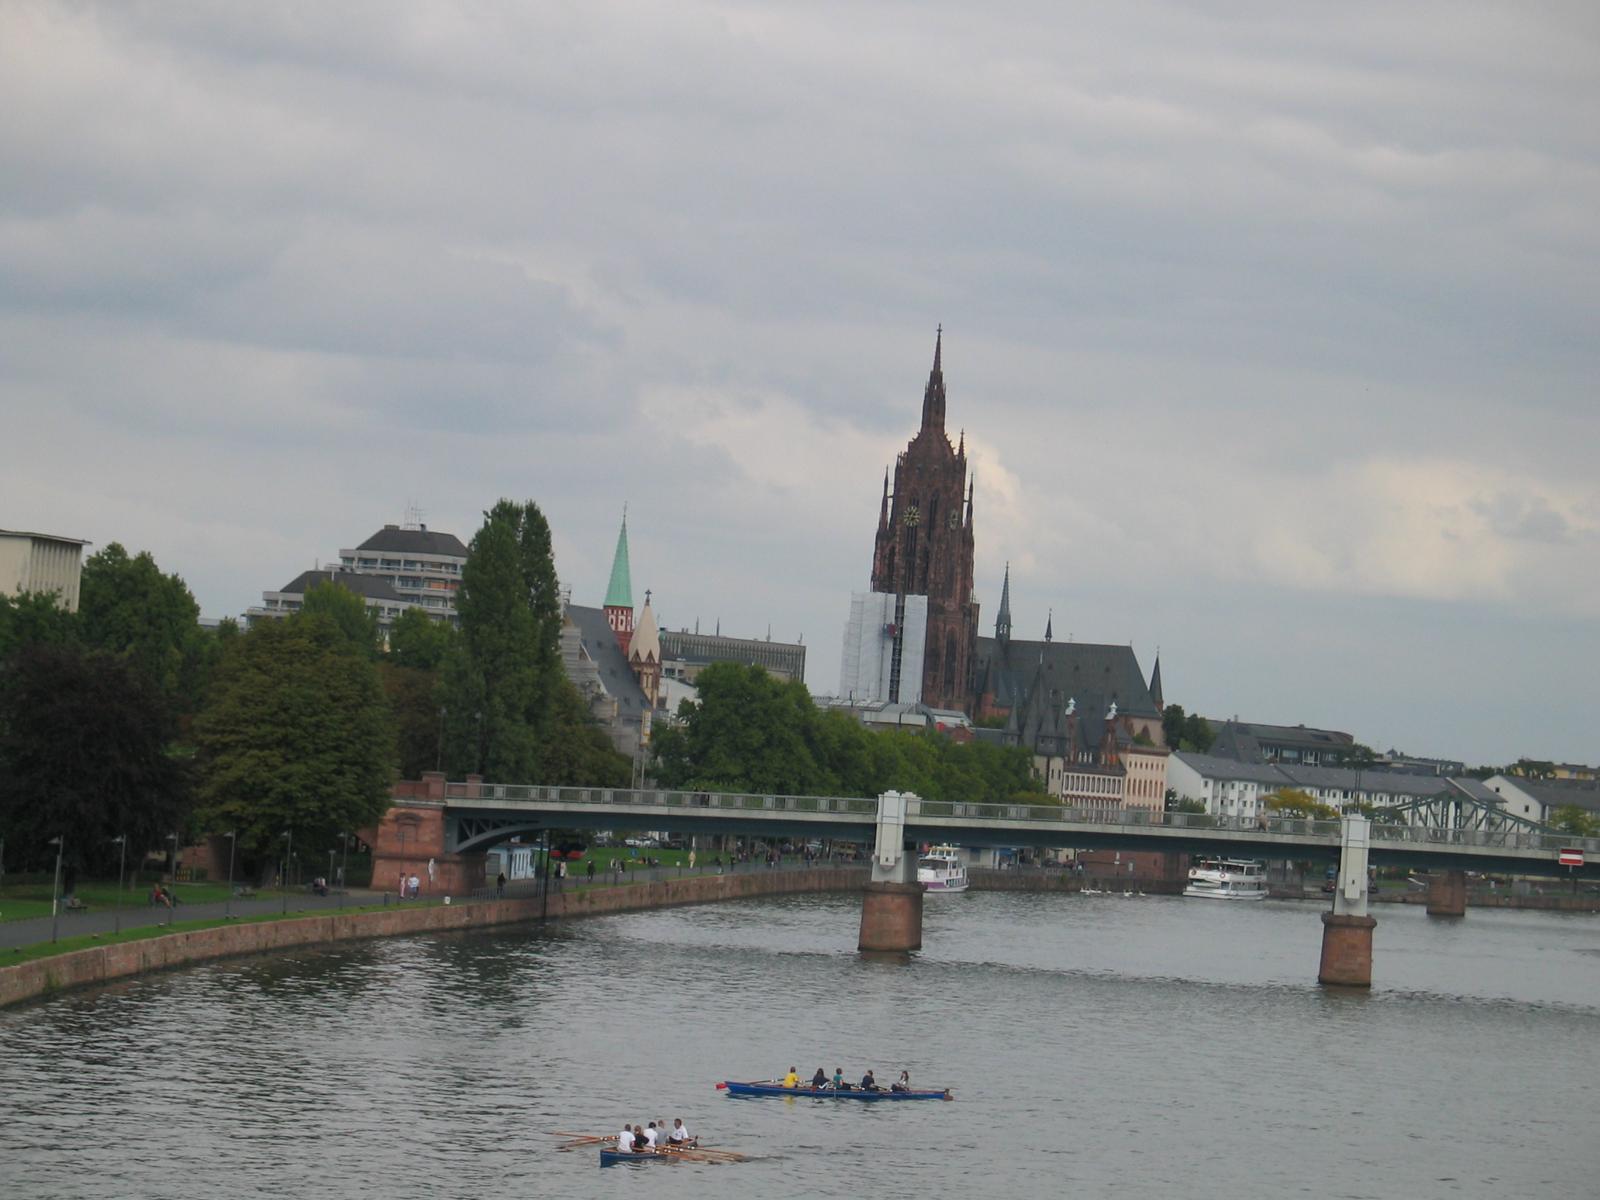 Frankfurt from just above the water.